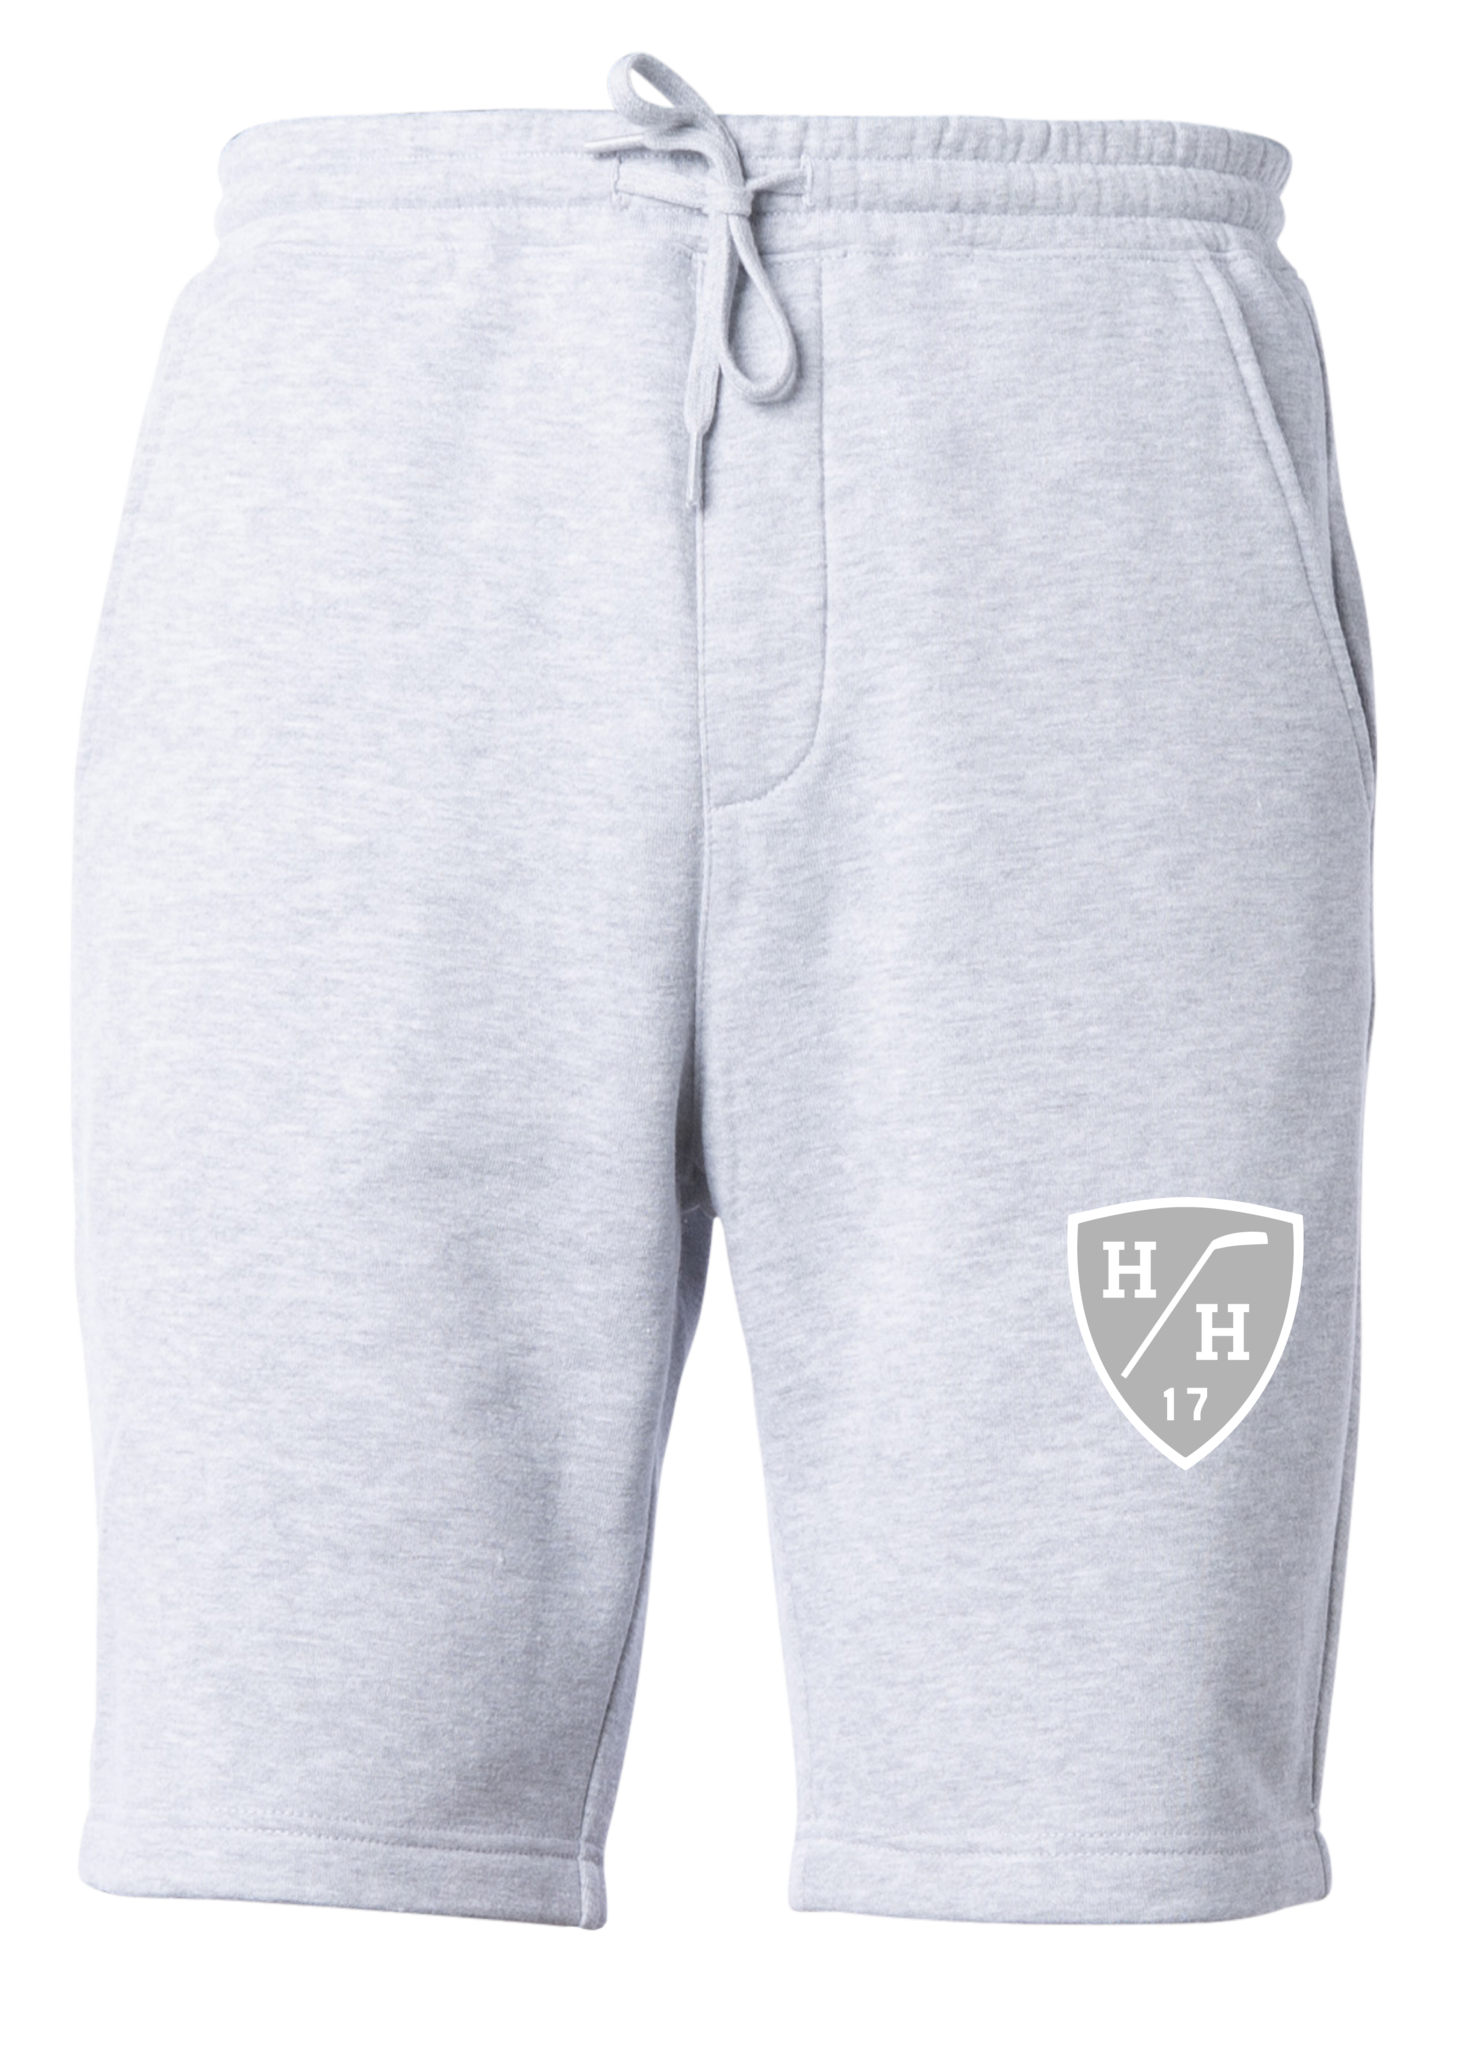 Light grey heathered gray design, white design, sweat short with drawstring, cotton blend taper fit.